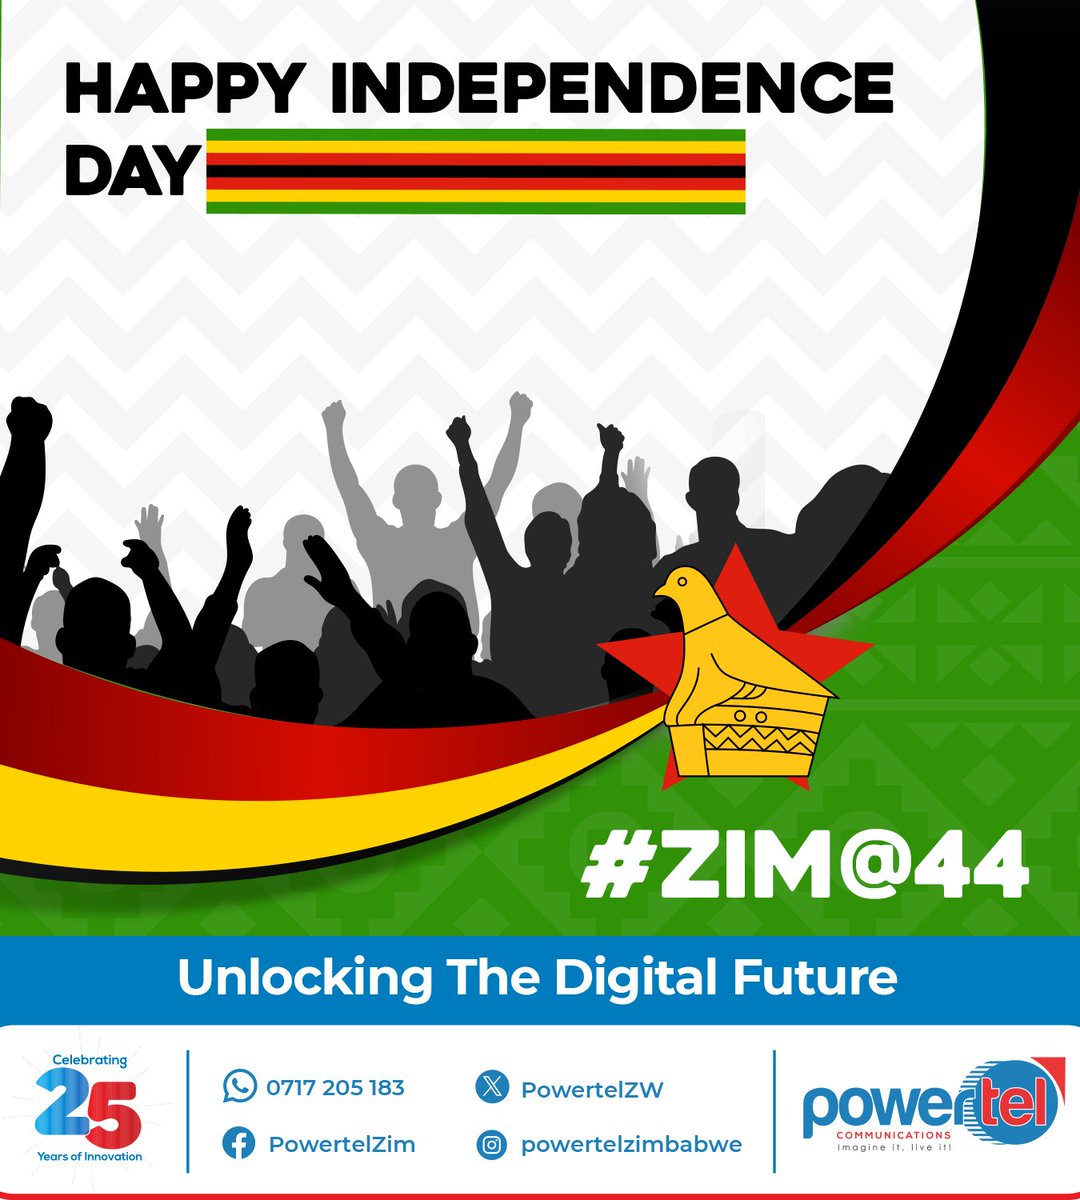 Today, we commemorate the day that symbolizes Zimbabwe's journey to freedom, unity, and self-determination. As we celebrate Independence Day, let us reflect on the remarkable strides our nation has made and the indomitable spirit that defines us. 🙌💚